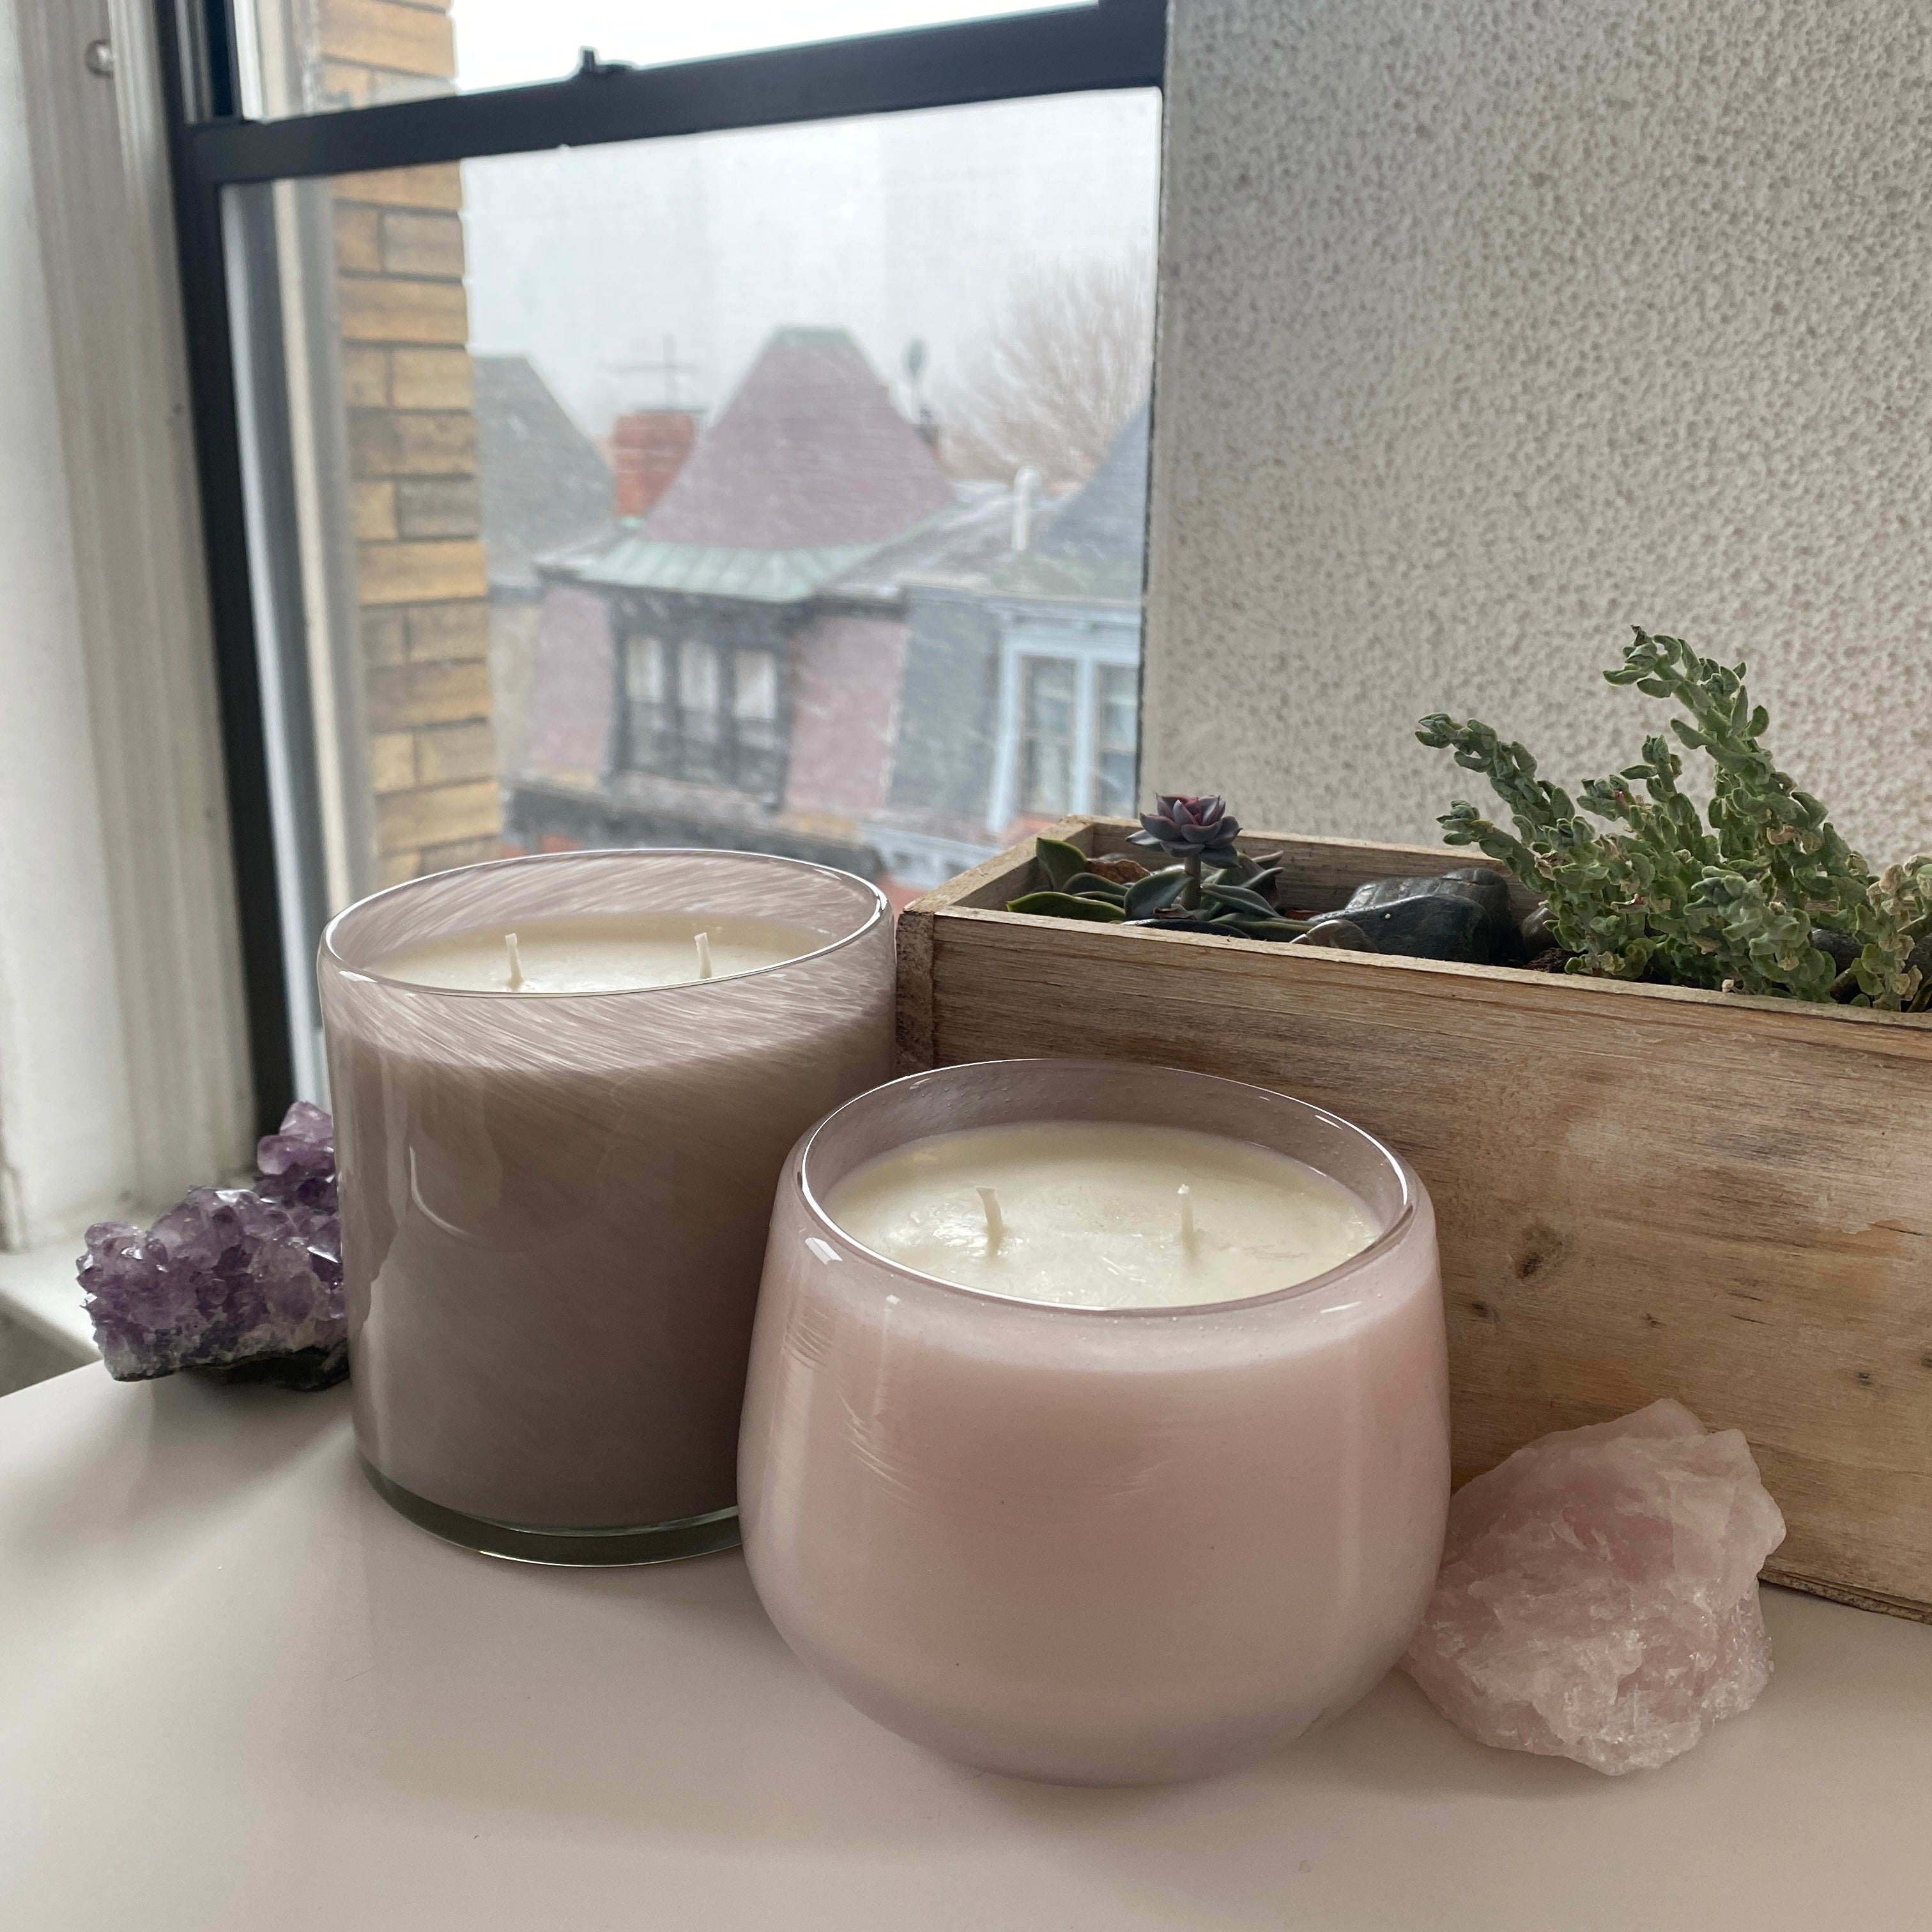 Candle Refill - About Our Scented Candle Refill Service – Great House Farm  Stores